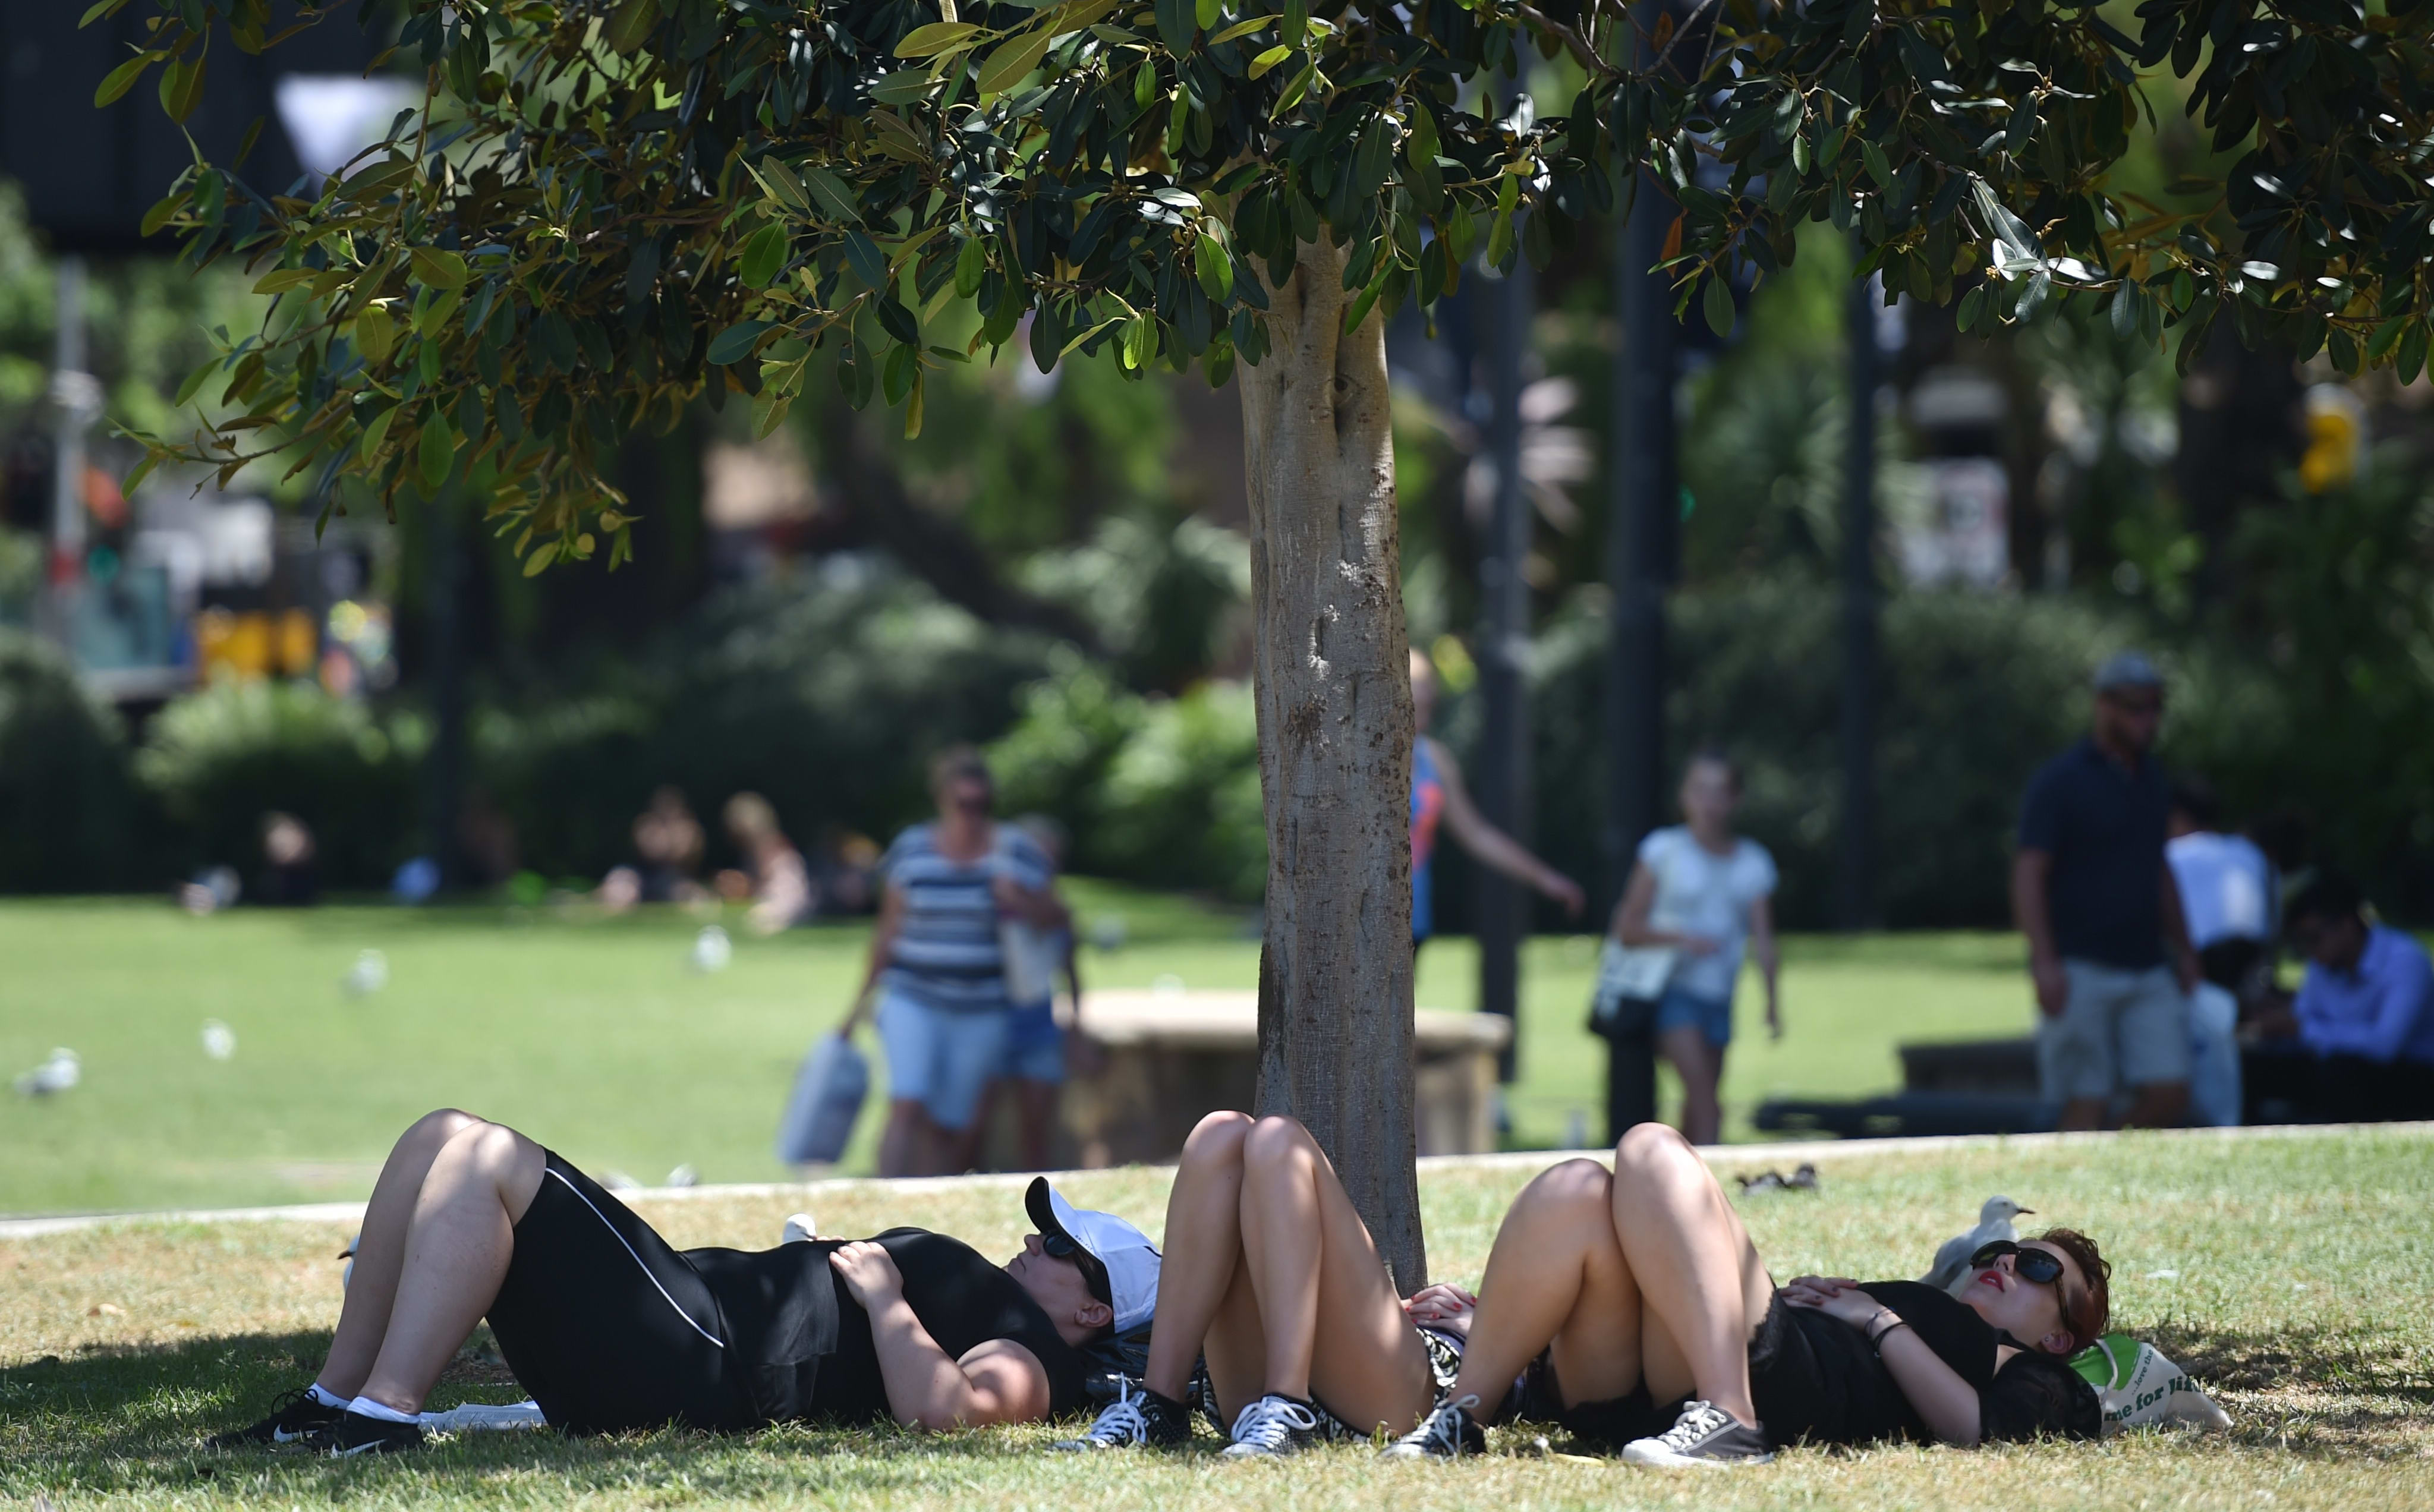 Temperatures in New South Wales could reach 47°C.